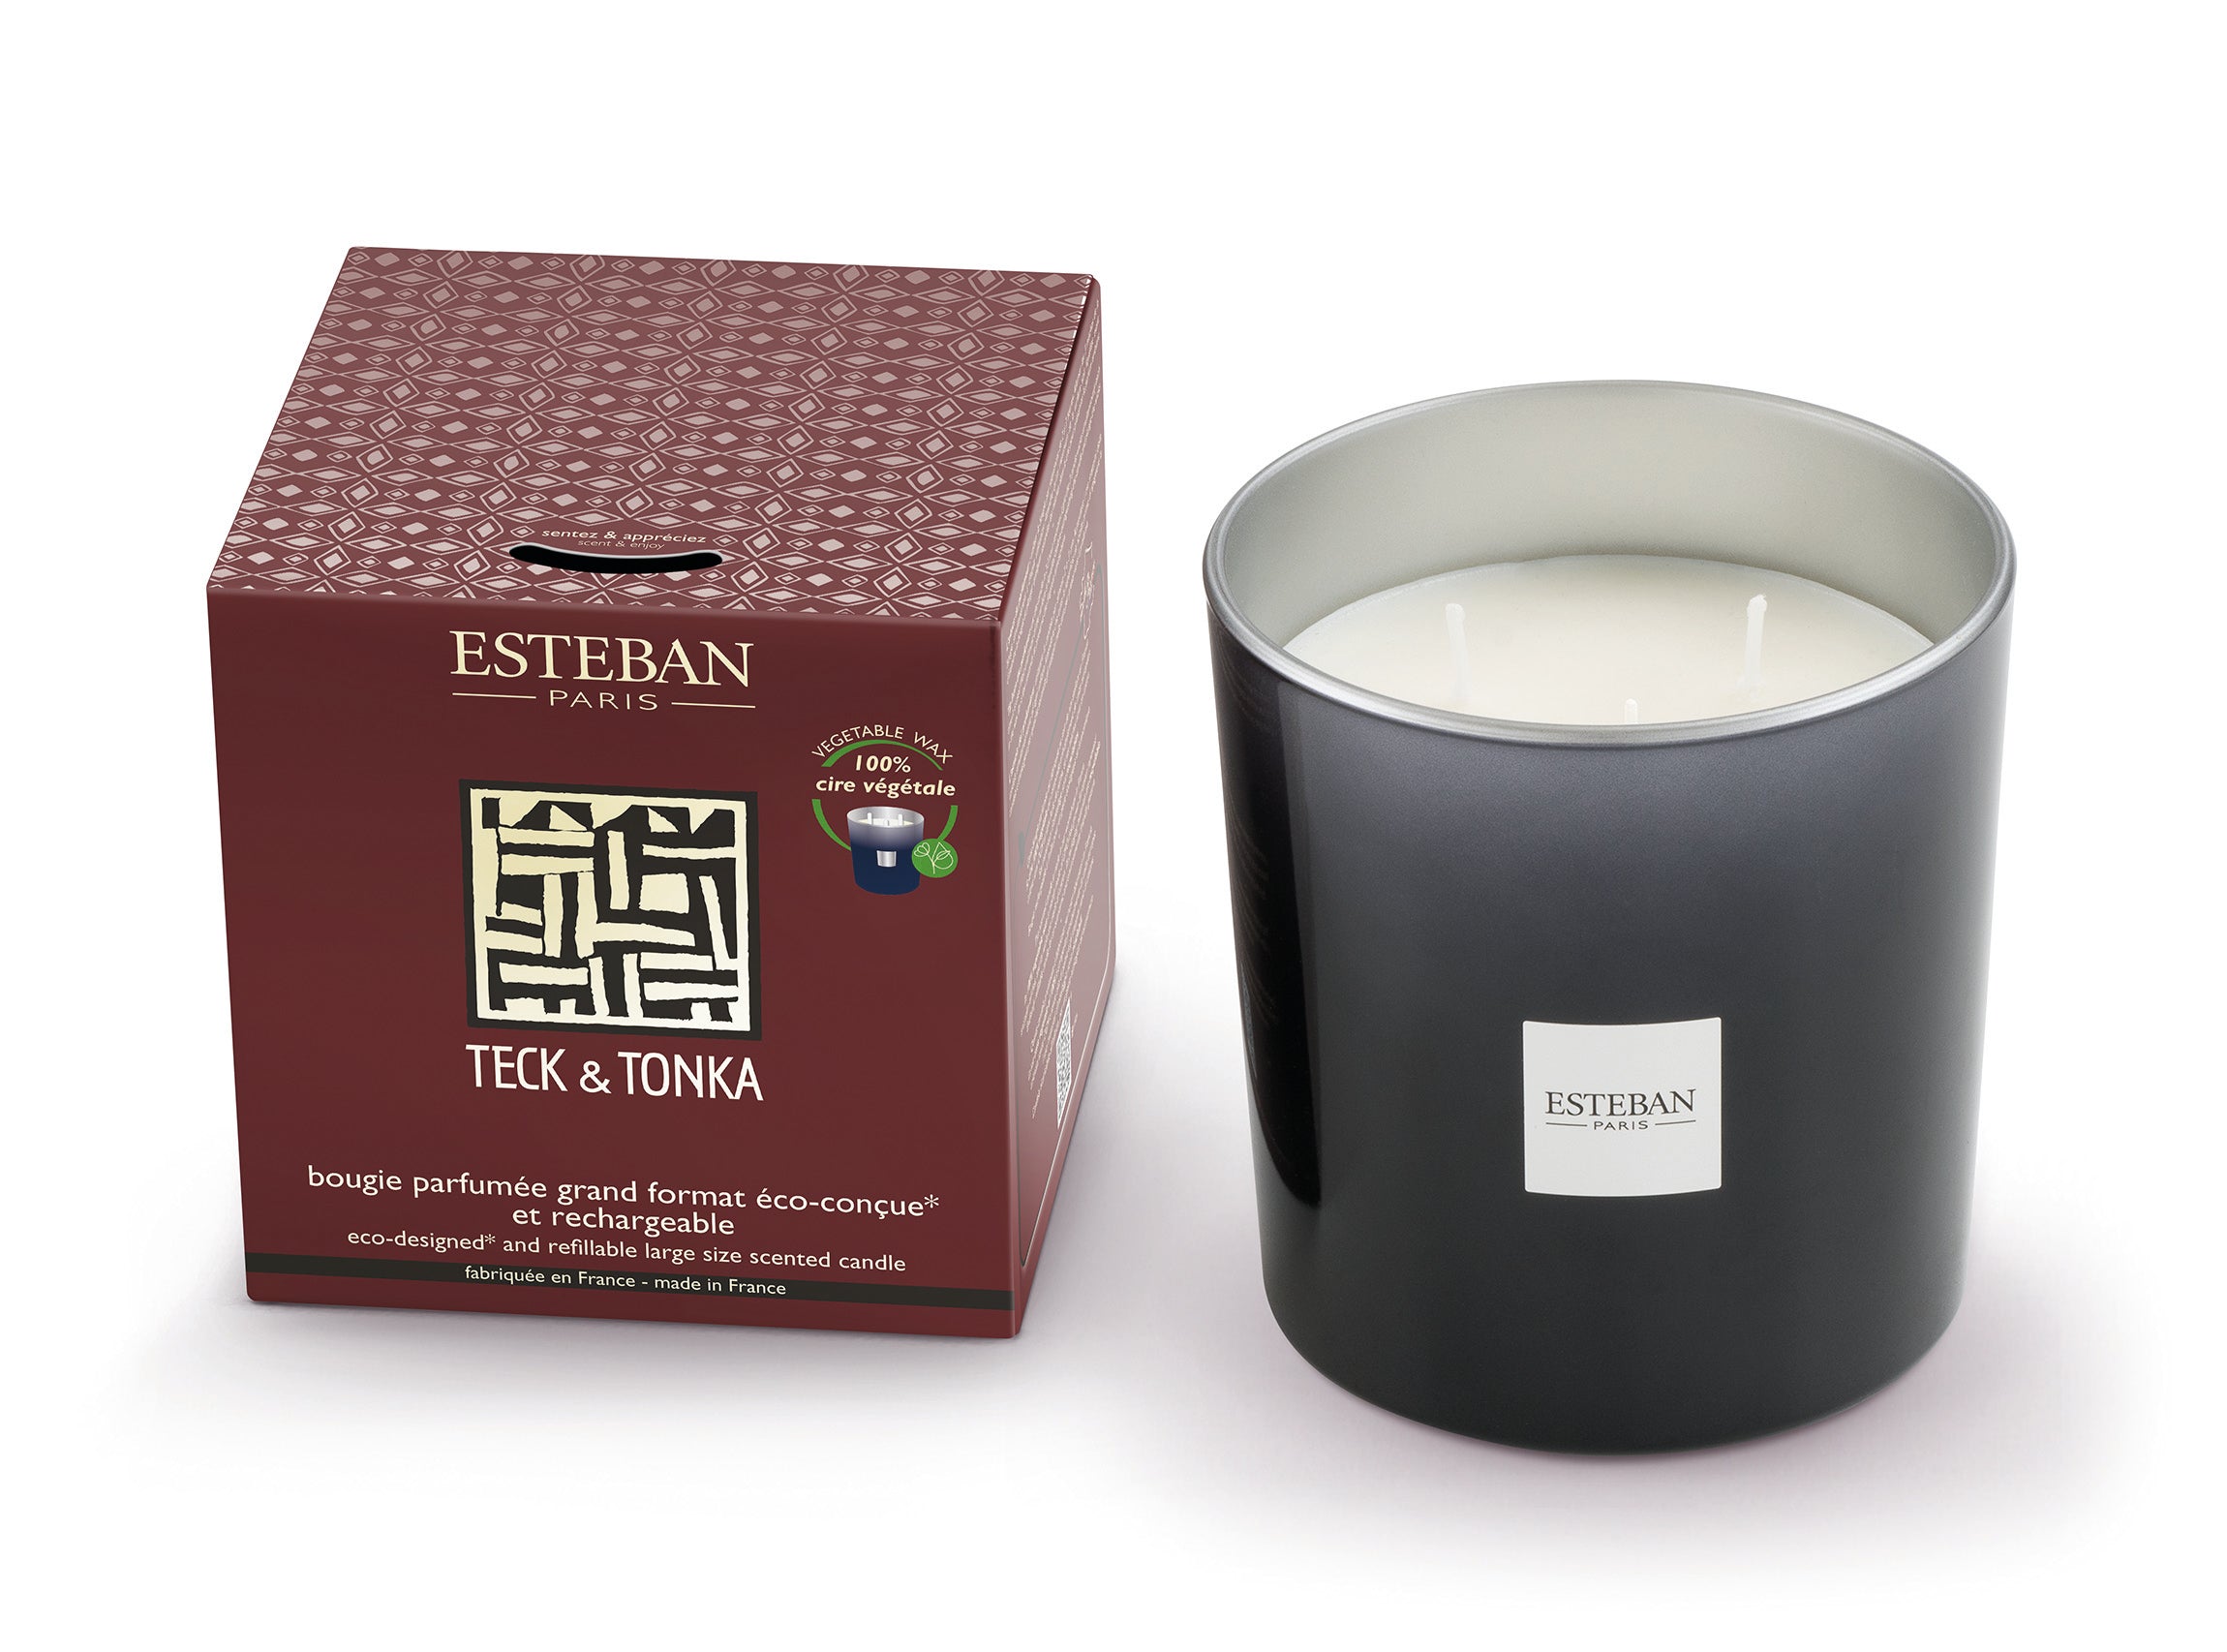  LARGE SIZE SCENTED CANDLE 450 g